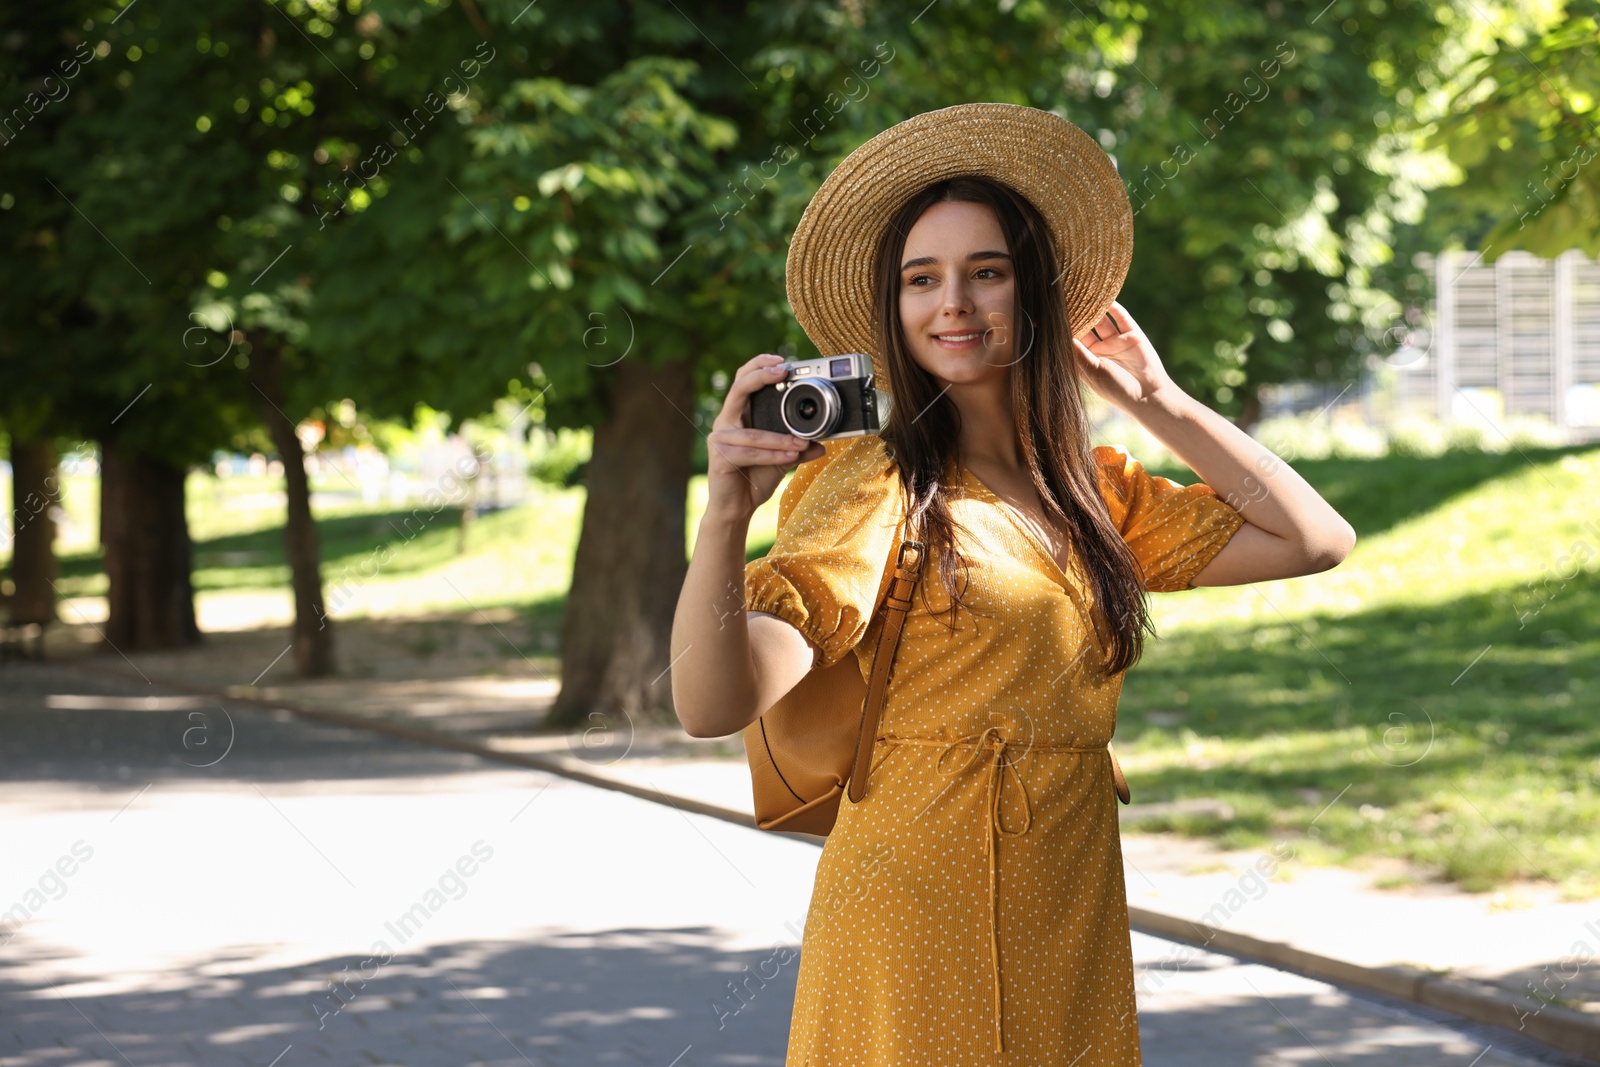 Photo of Travel blogger takIng picture with vintage camera in park